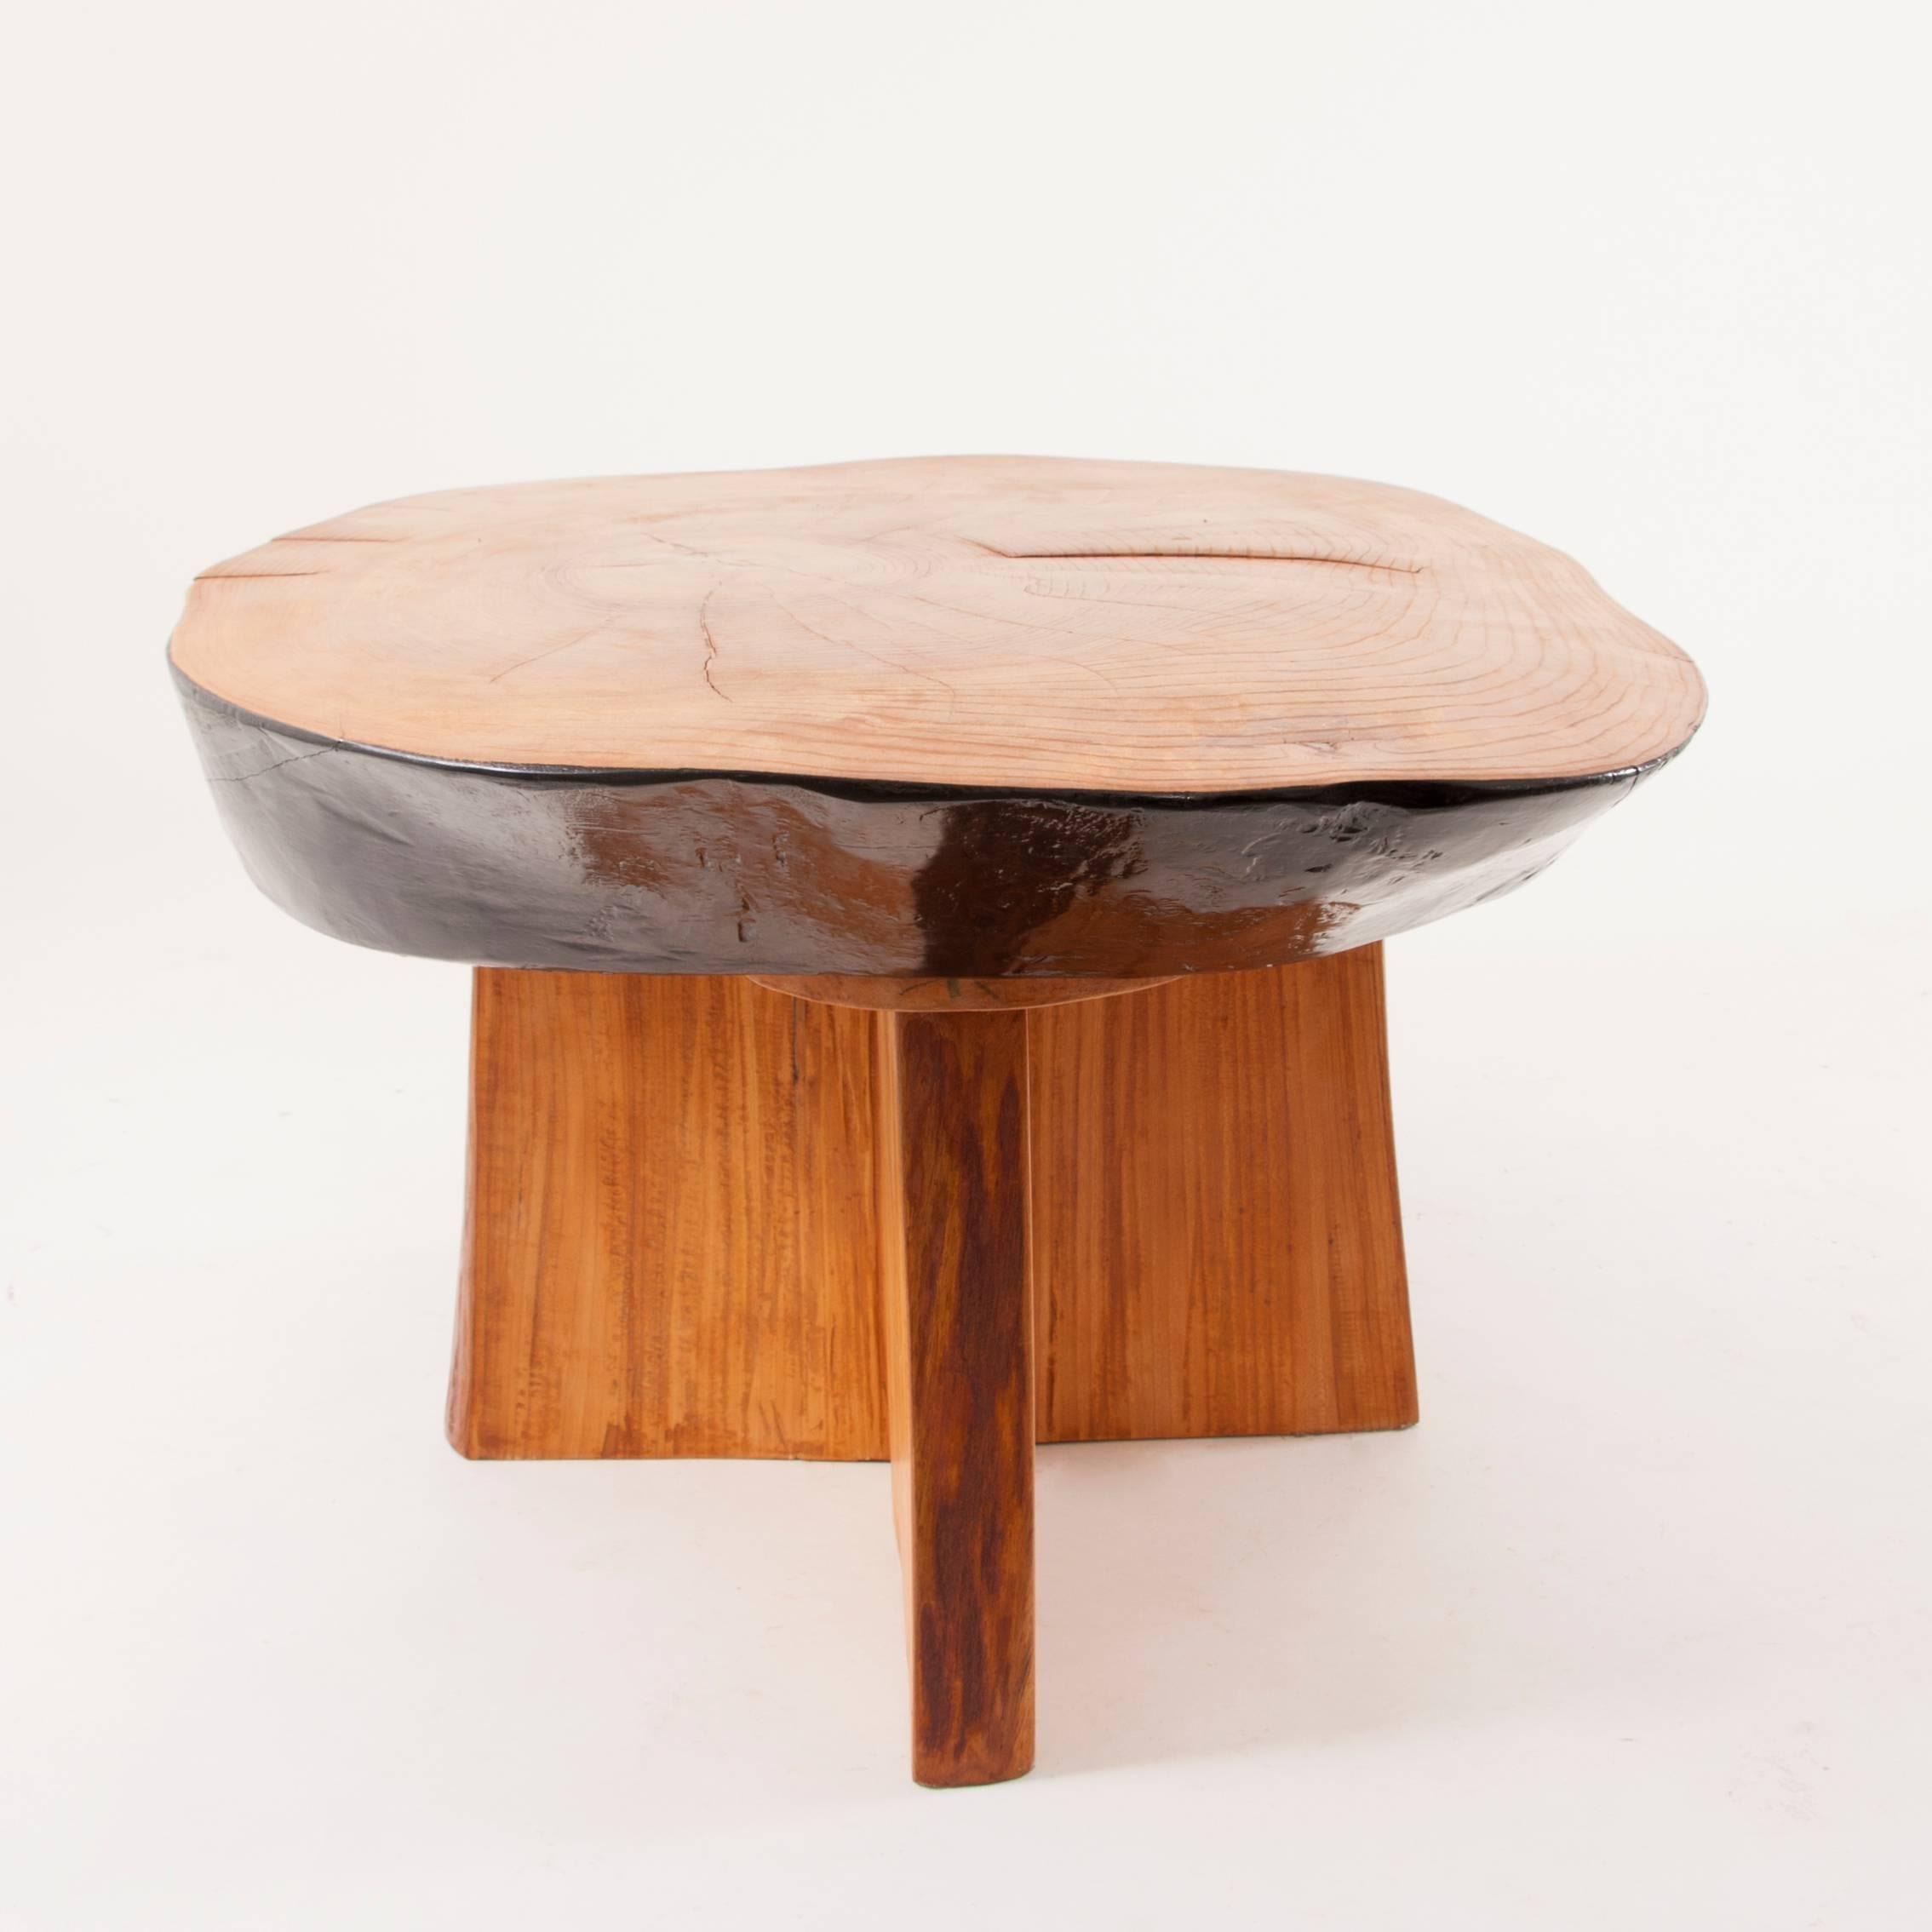 An impressive and beautiful coffee or cocktail table in the style of George Nakashima from the 1950s. Made of solid maple wood, in excellent condition.